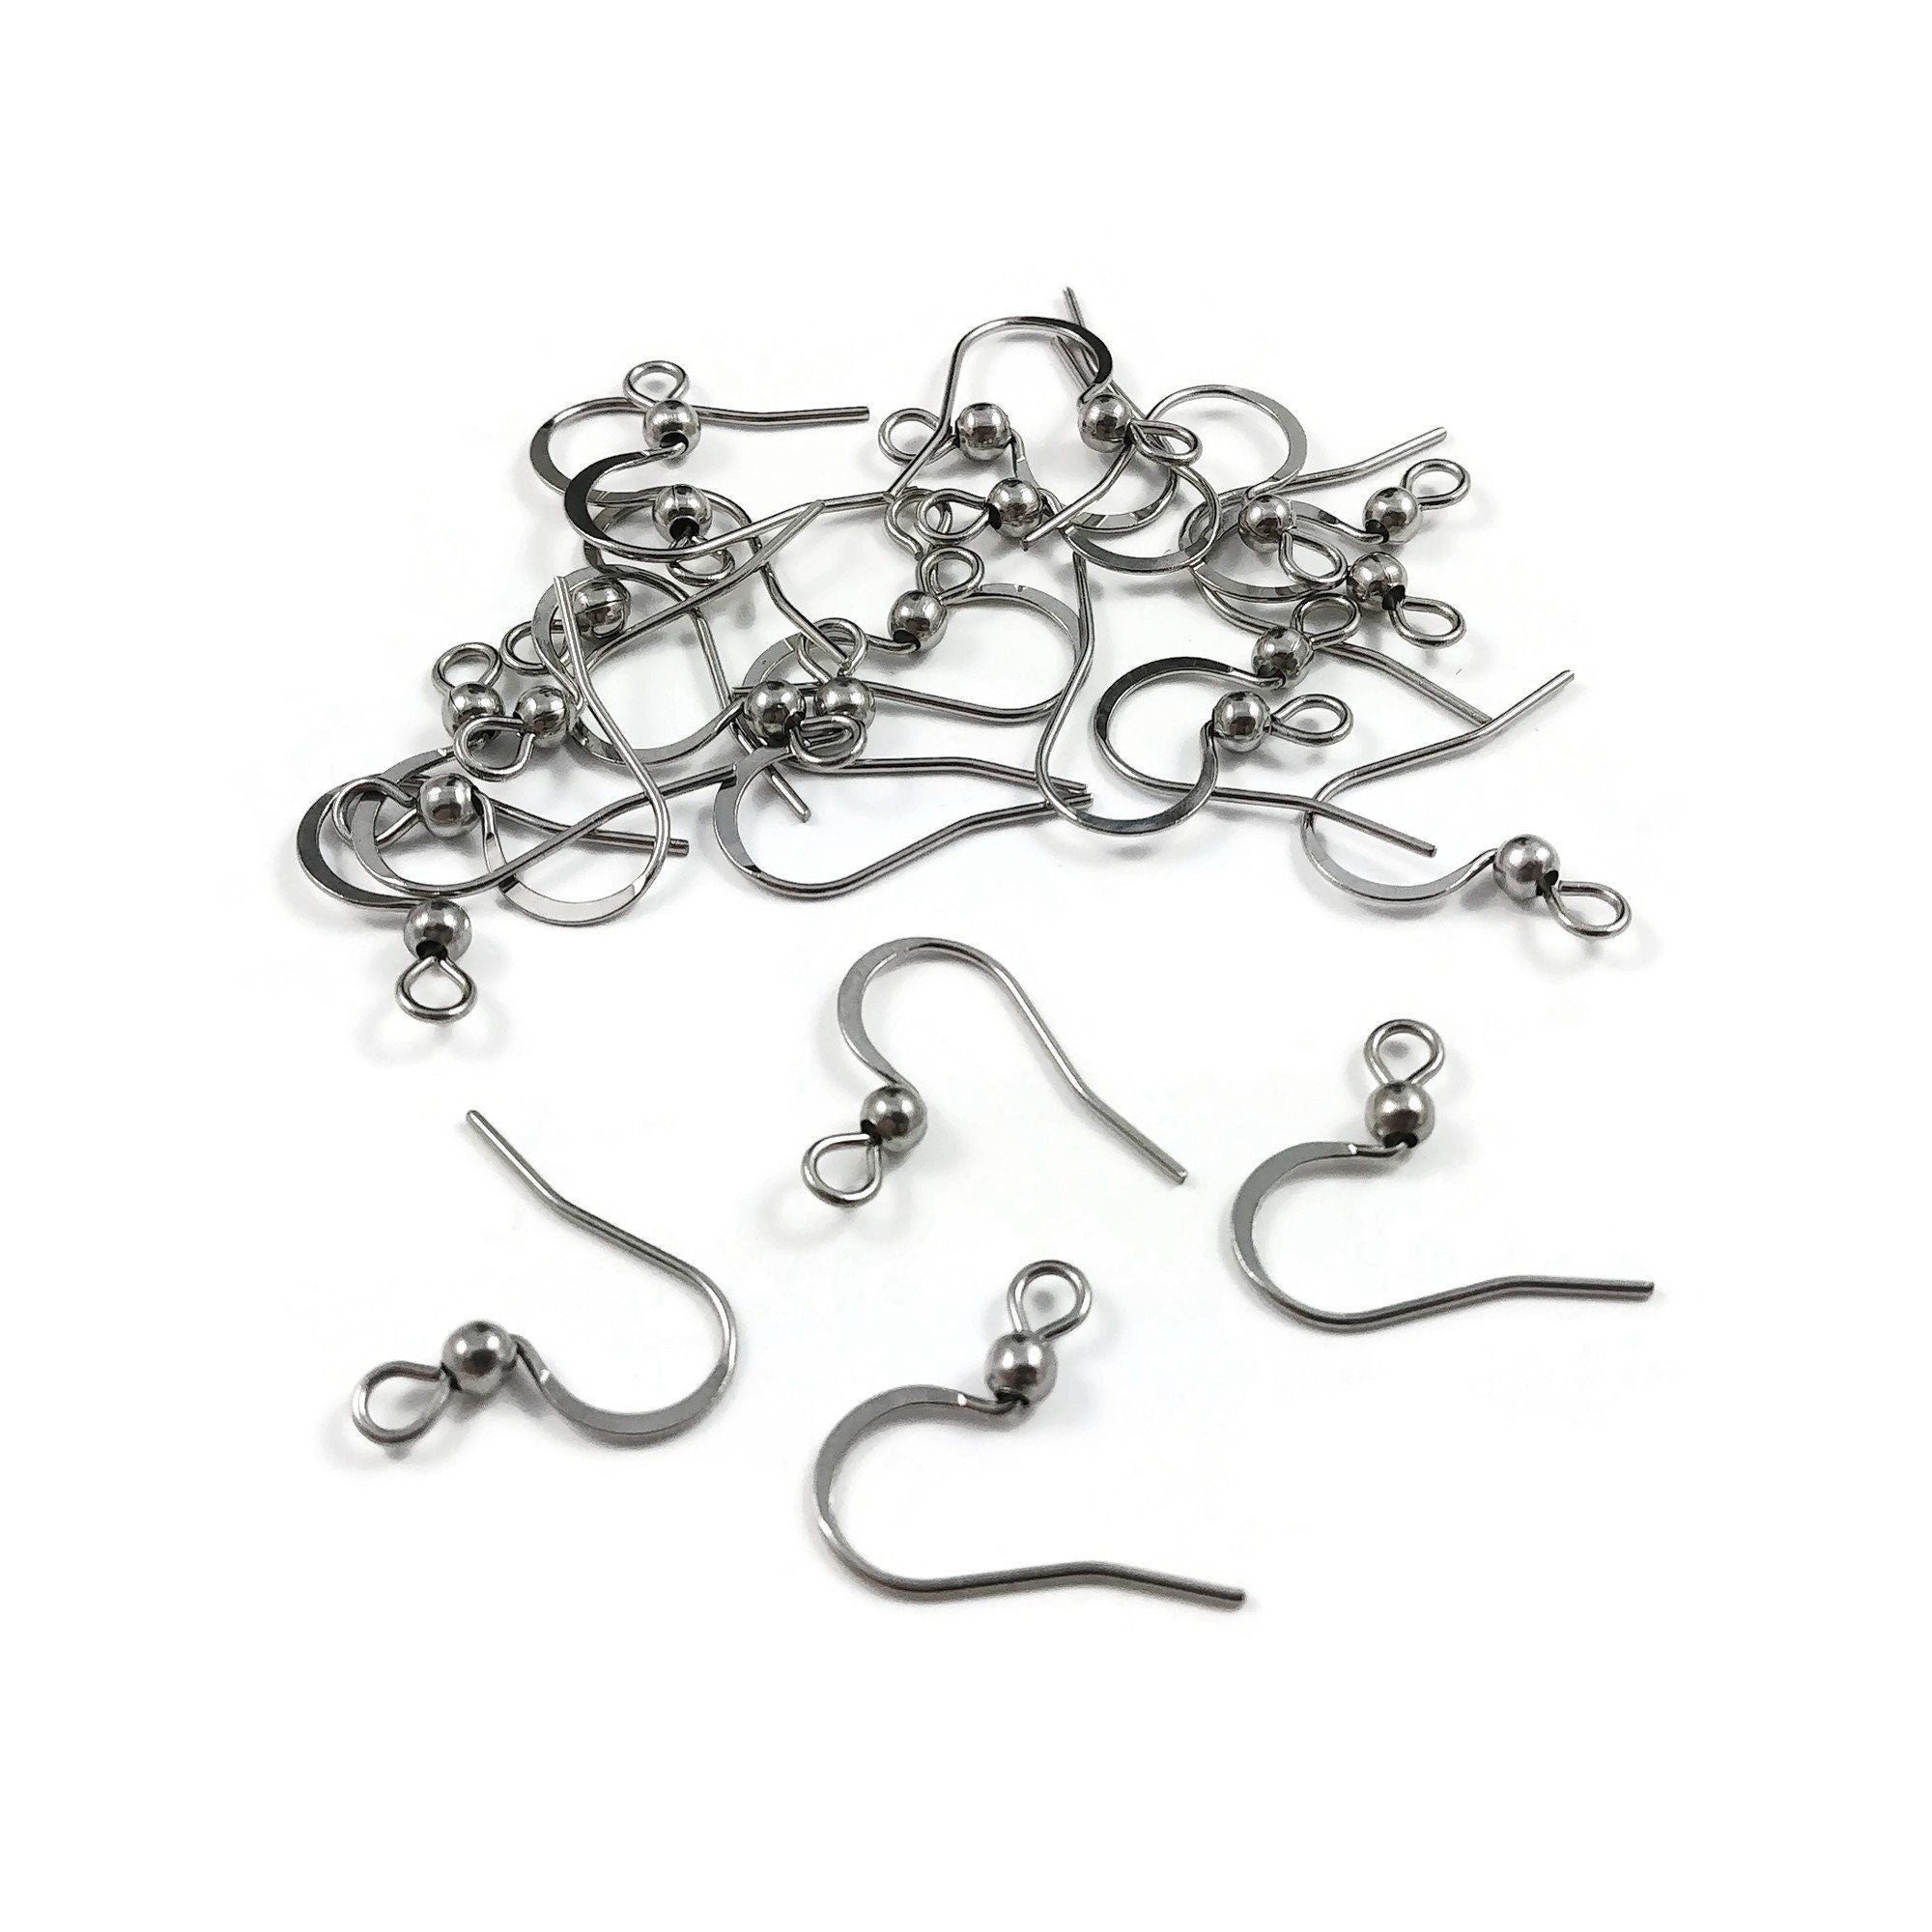 DICOSMETIC 40pcs 4 Colors 304 Stainless Steel Leverback Earring